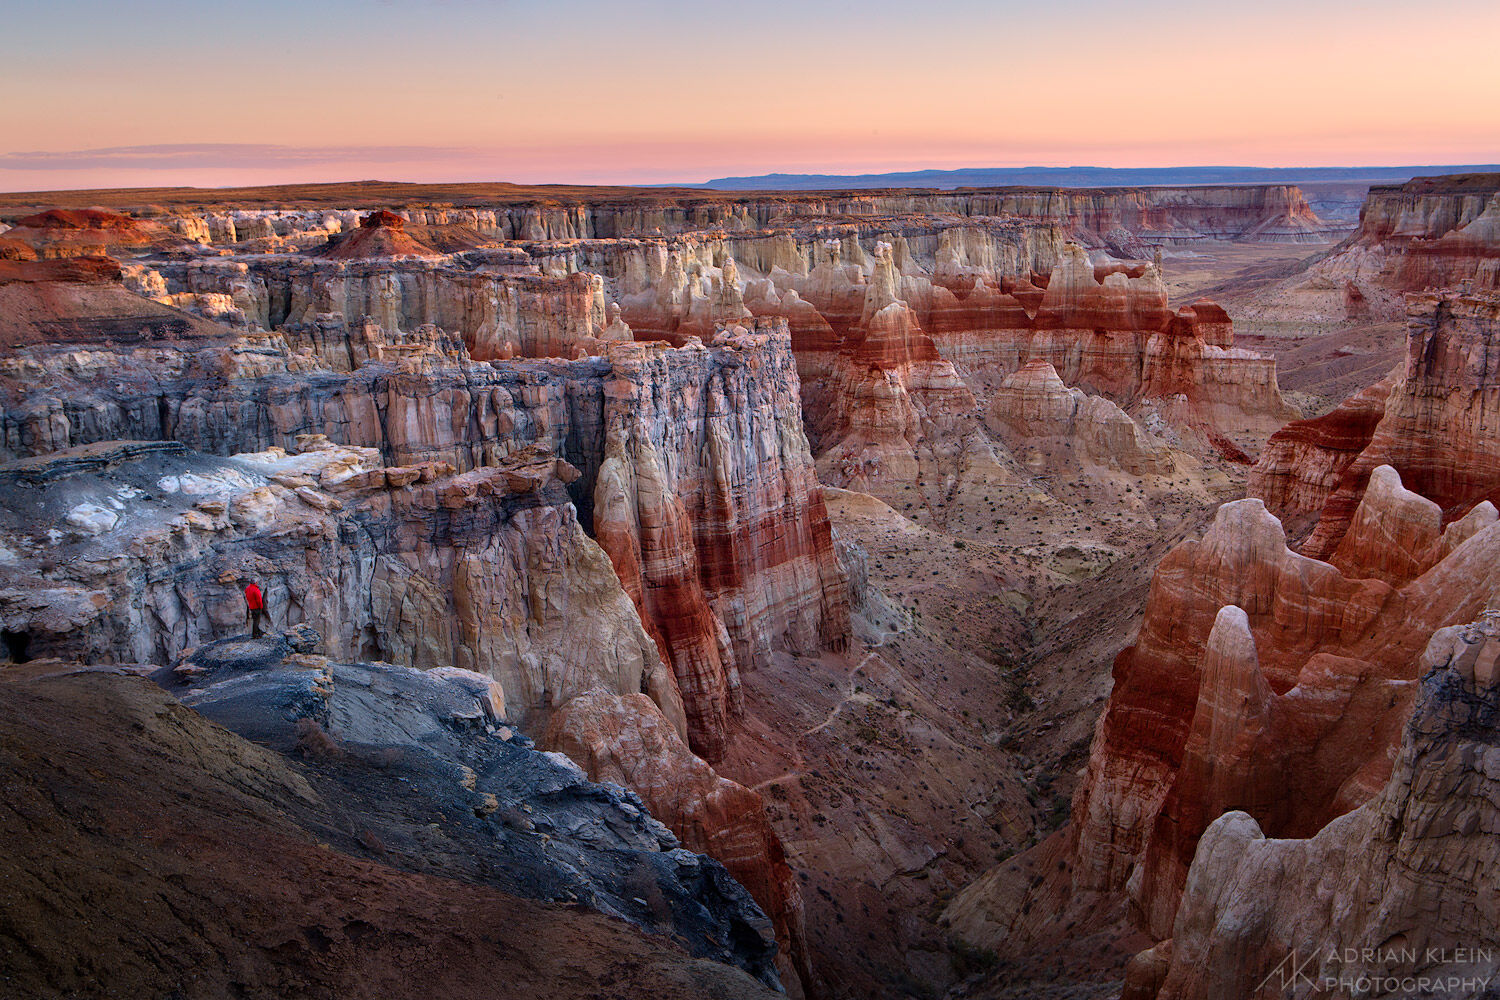 My friend David stands along the cliff edge watching the sunrise at Coal Mine Canyon, Arizona. Limited Edition of 50.